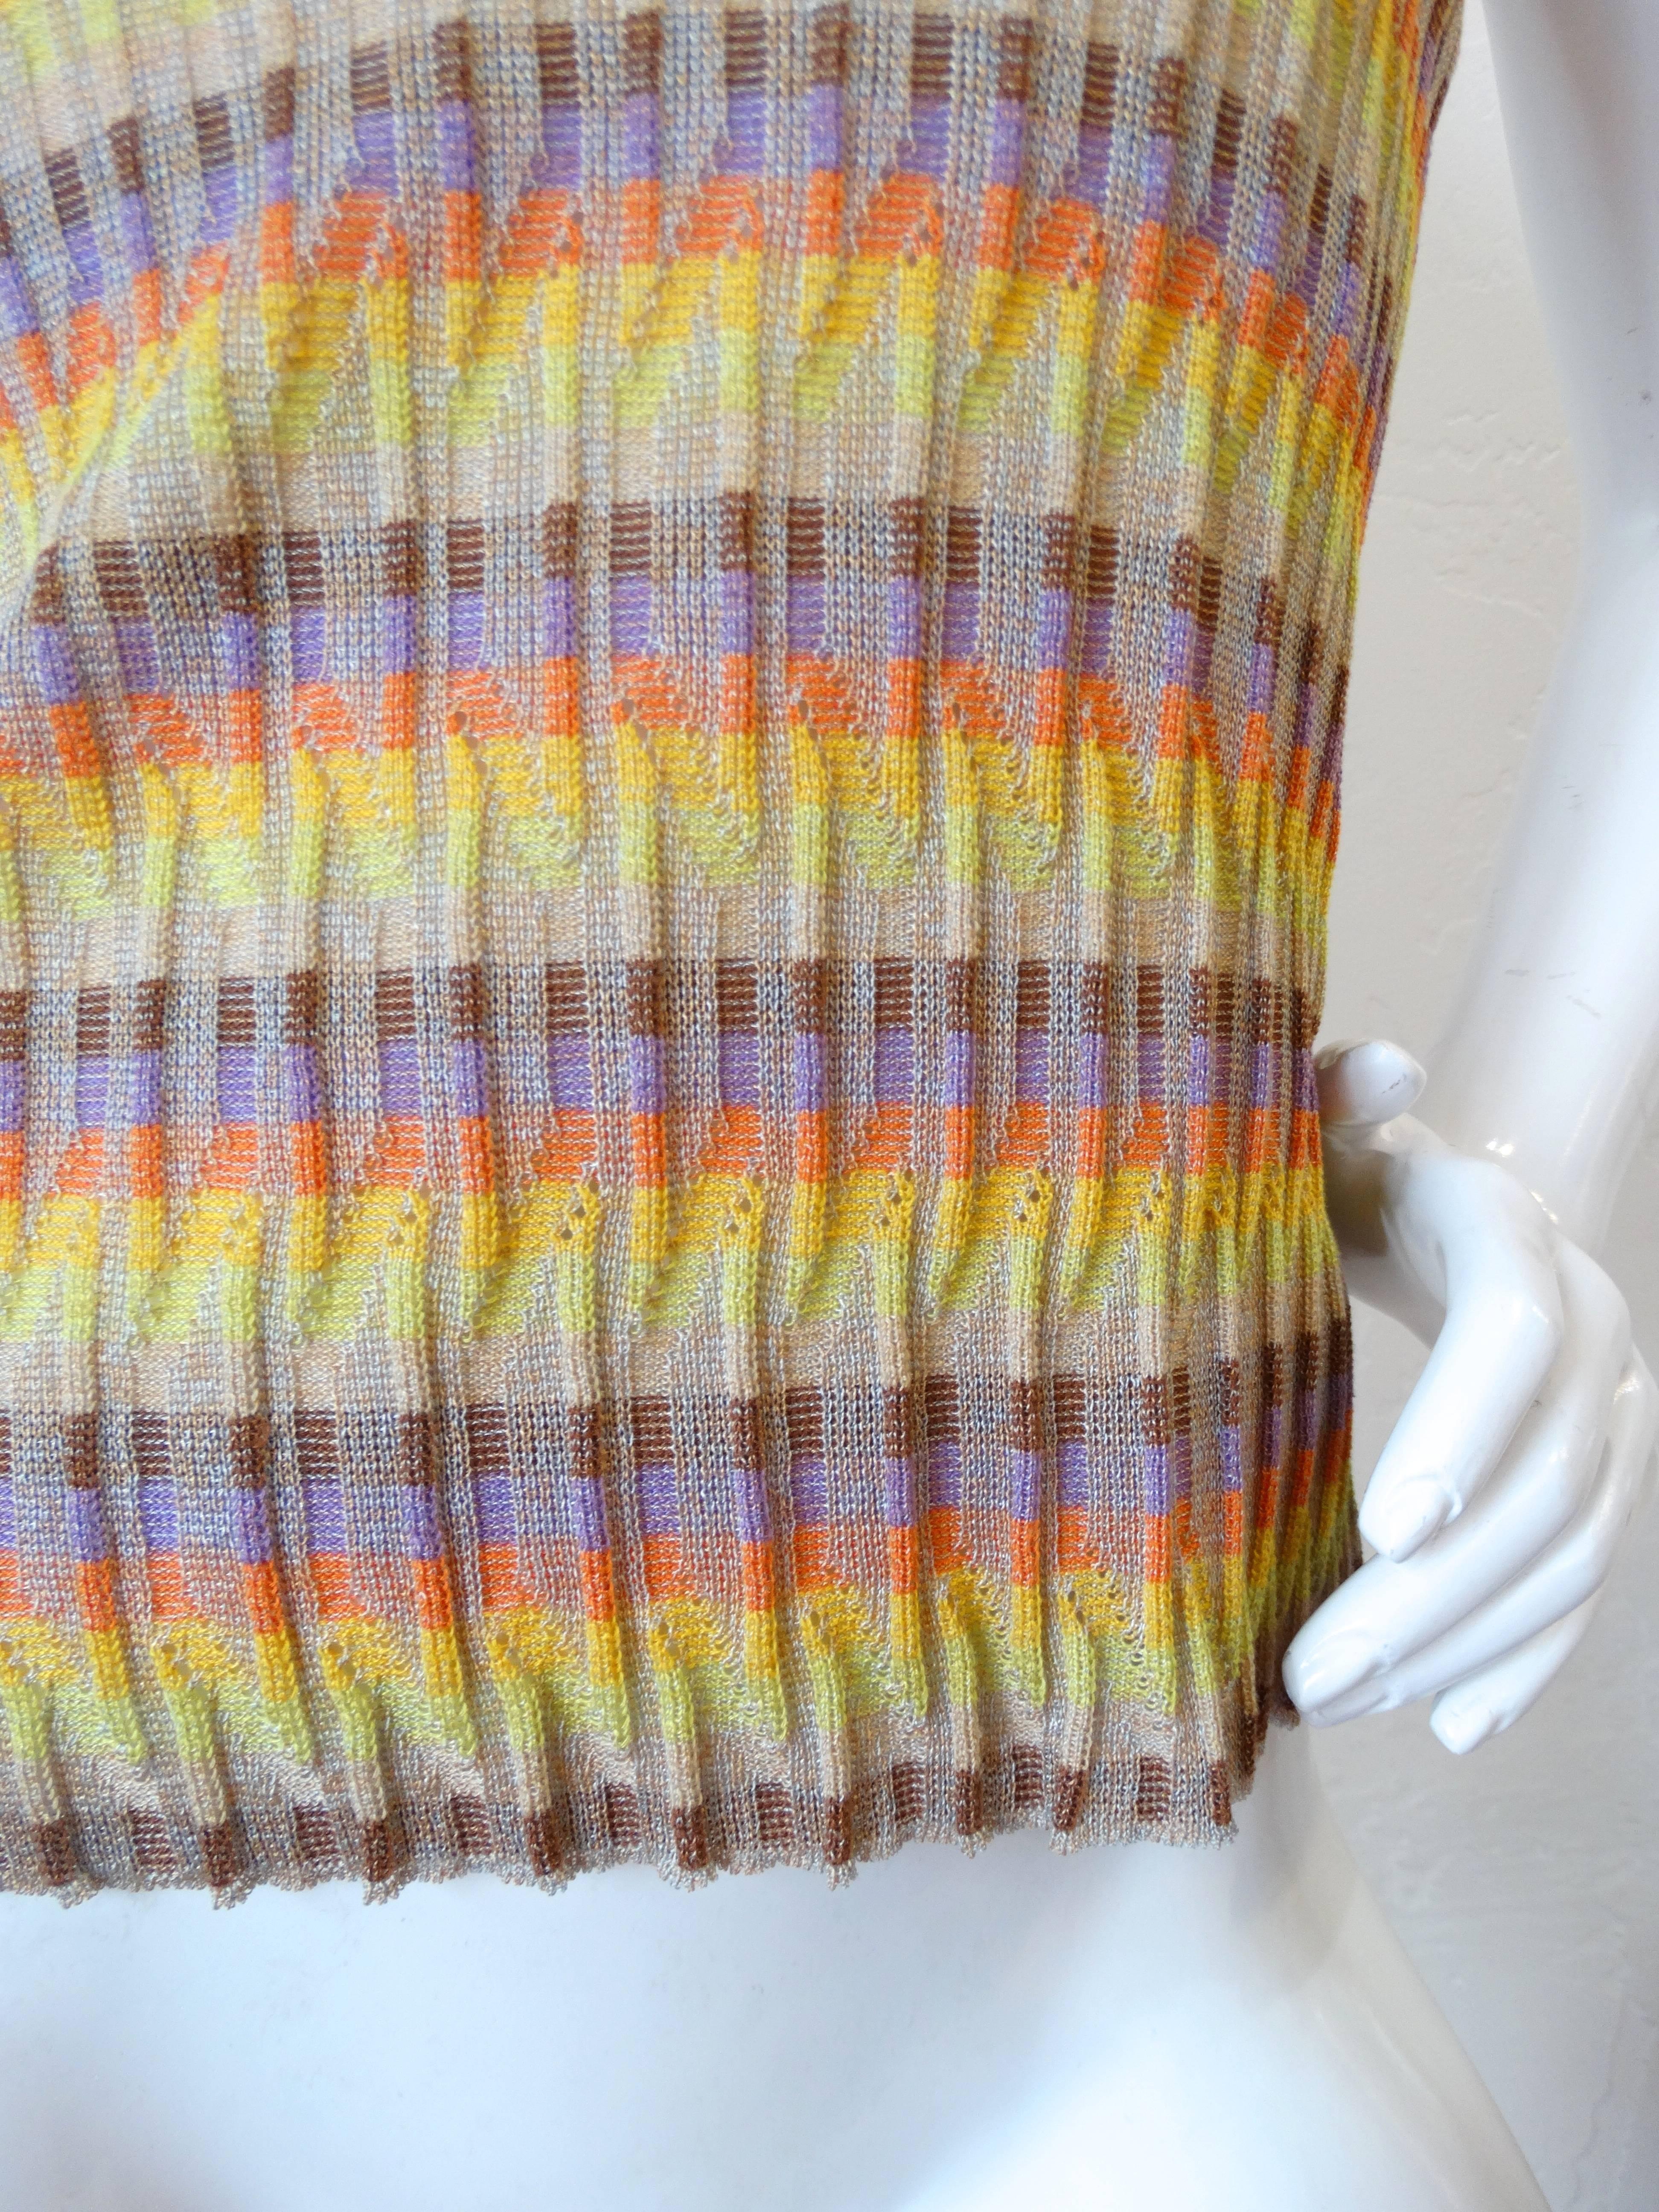 The perfect piece for your summer wardrobe- this adorable little Missoni knit tank! Pair with your favorite ripped denim and a belt bag and you're festival ready! Made of a slightly sheer knit fabric in multicolor wavy stripes. Tank top style fit